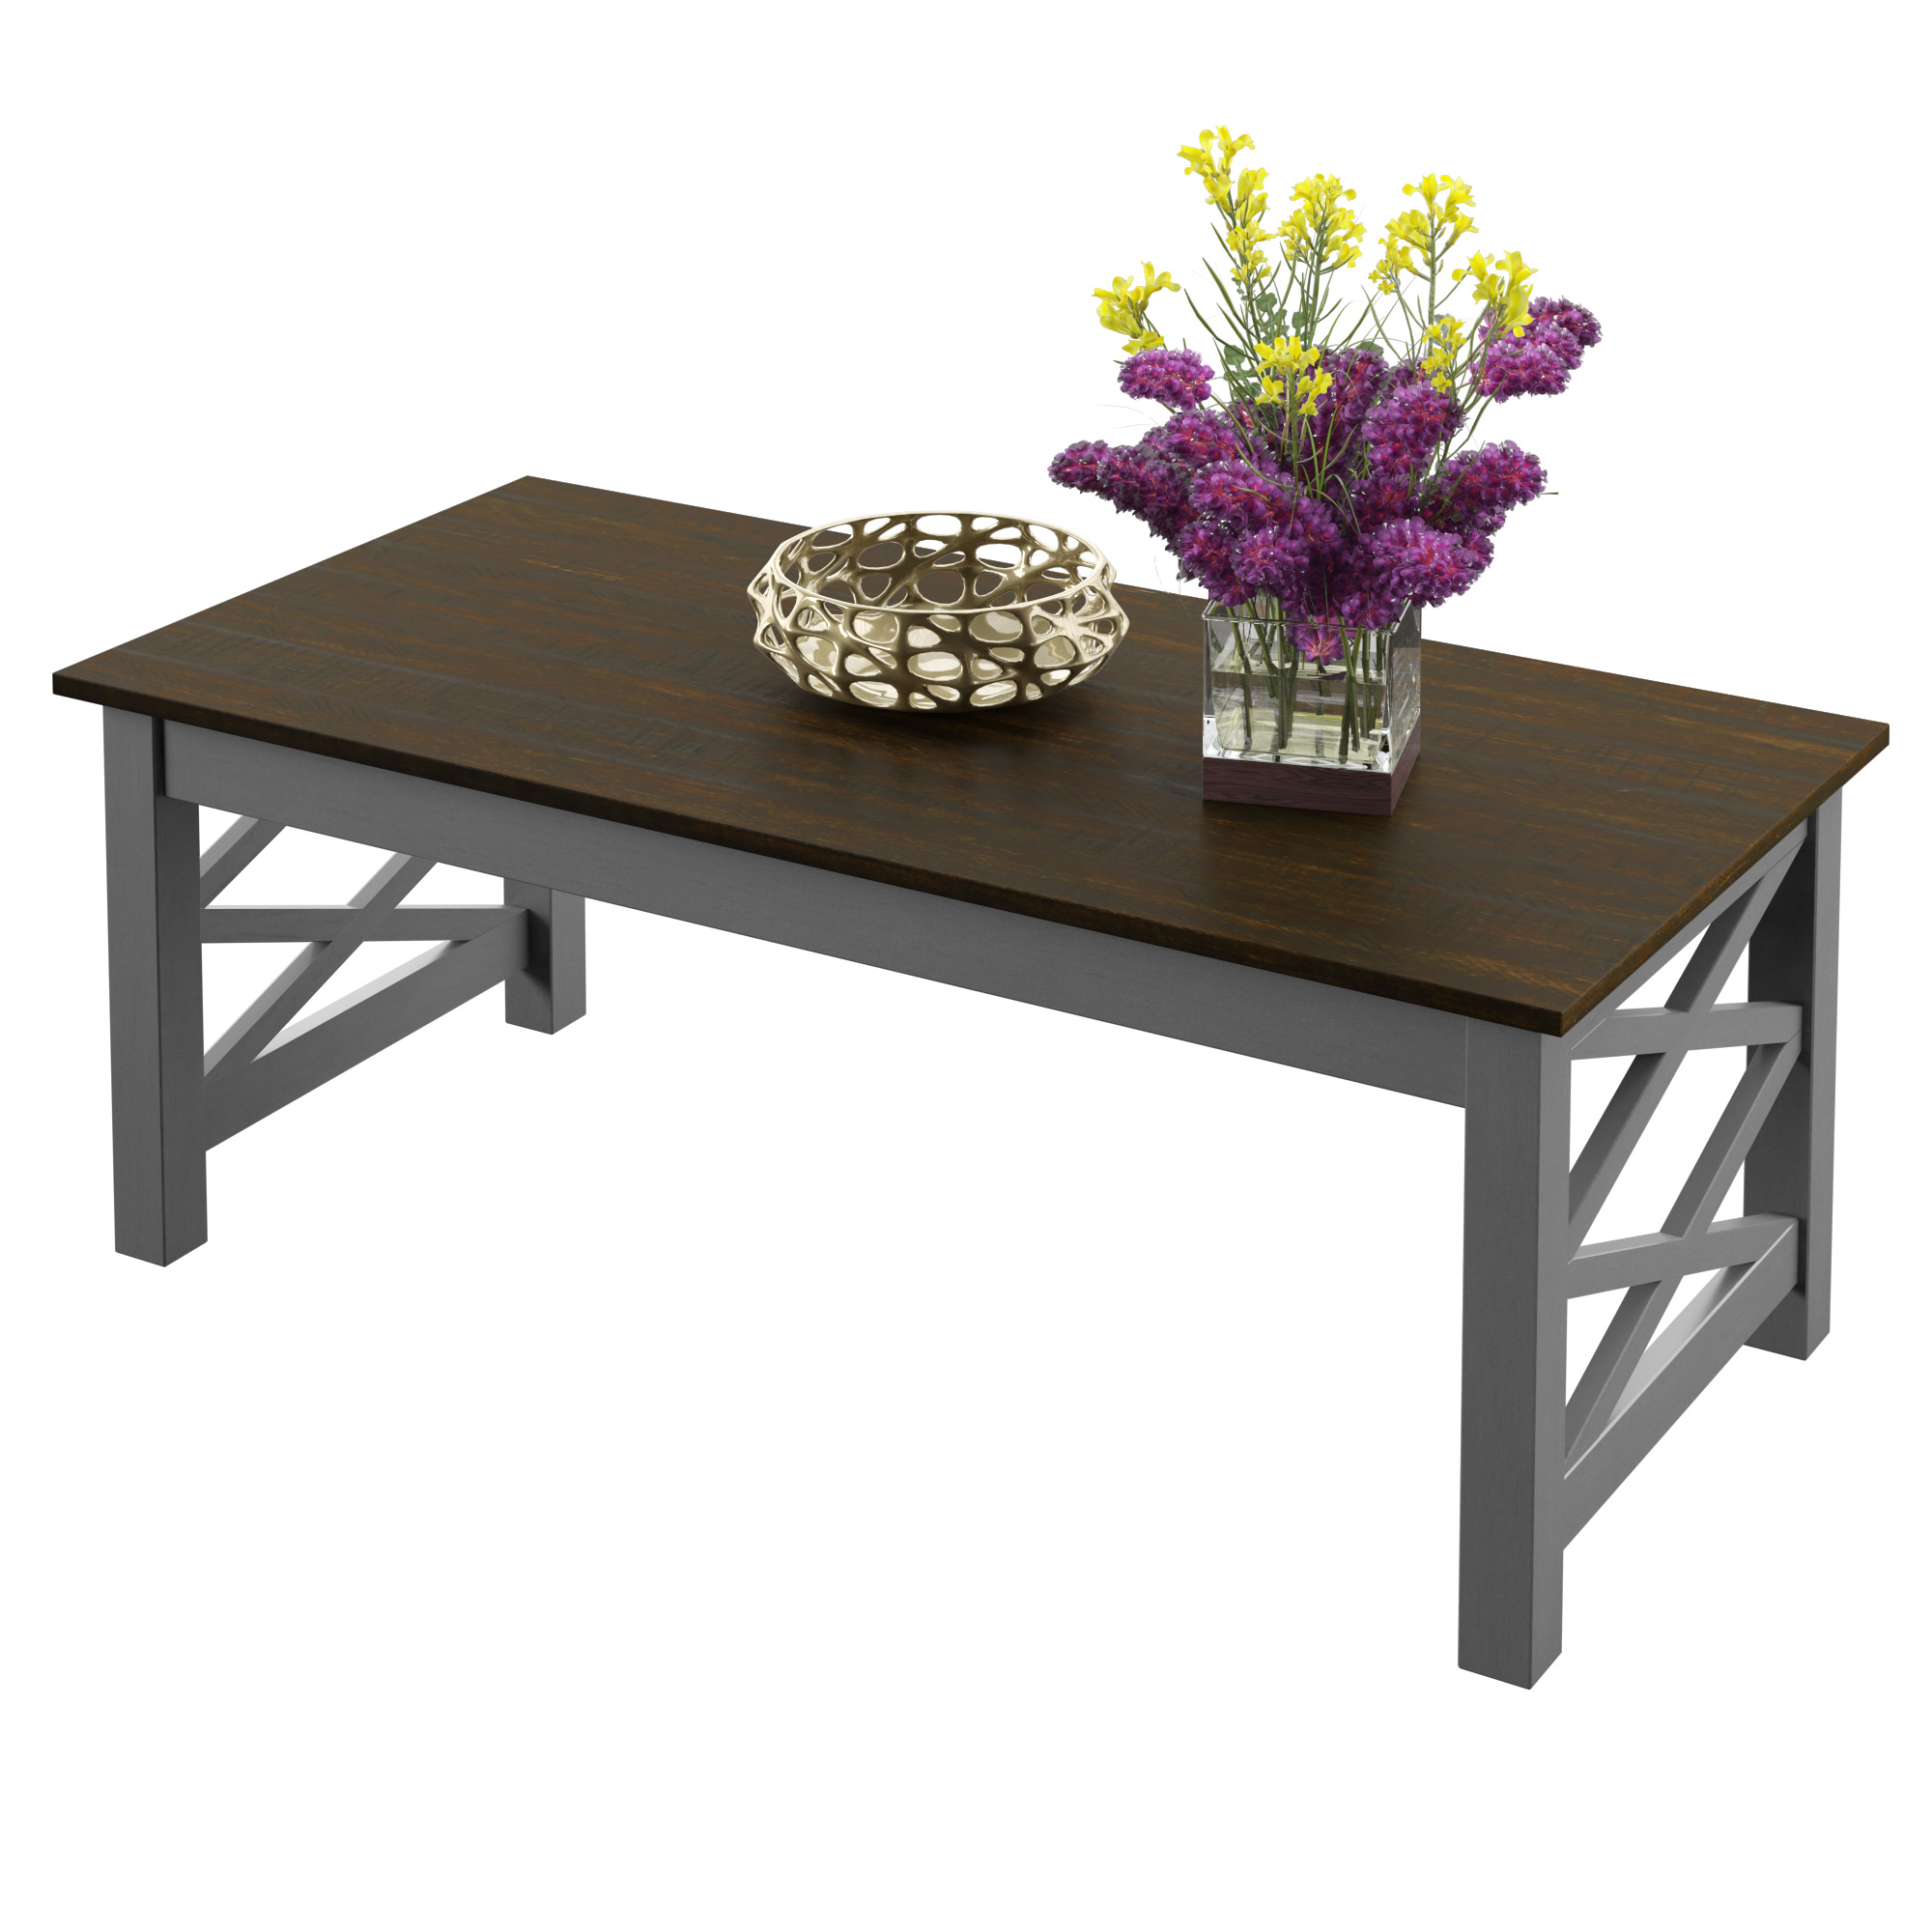 Twin Star Home Modern Farmhouse Coffee Table with Criss-Cross Details in Antique Gray - image 5 of 5